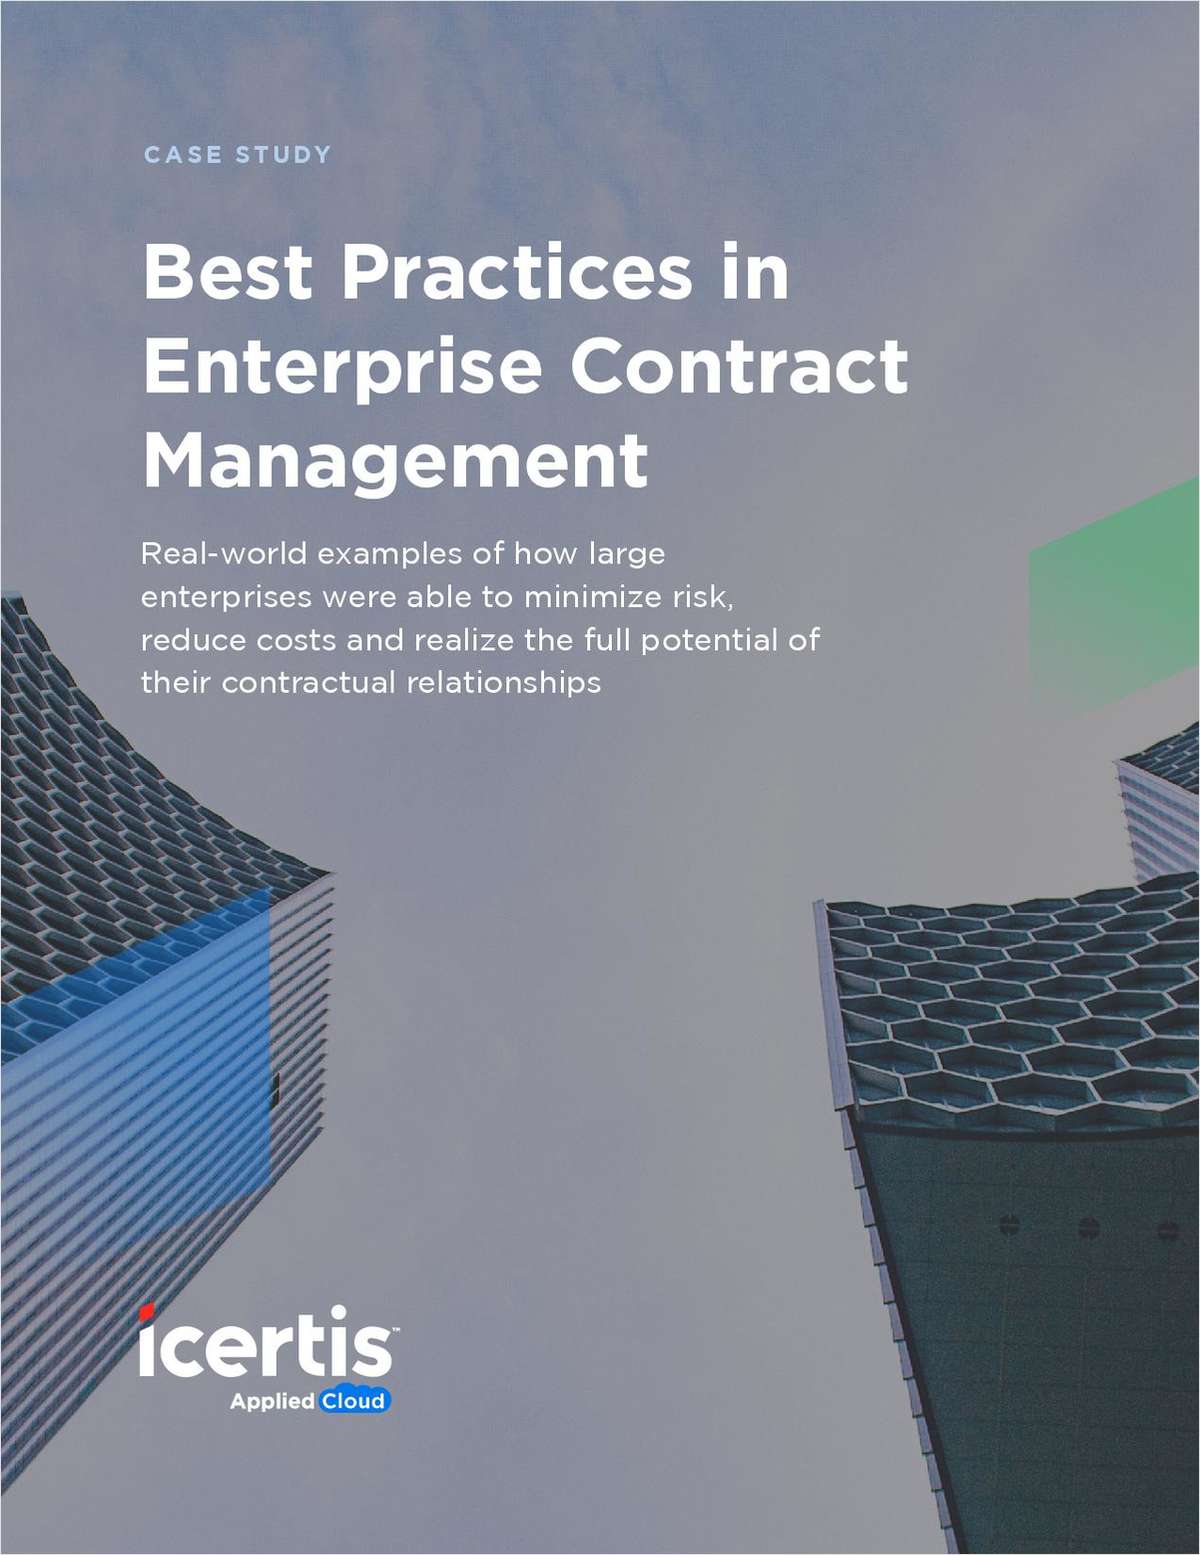 How to Minimize Risk and Reduce Costs by Implementing an Enterprise Contract Management Platform